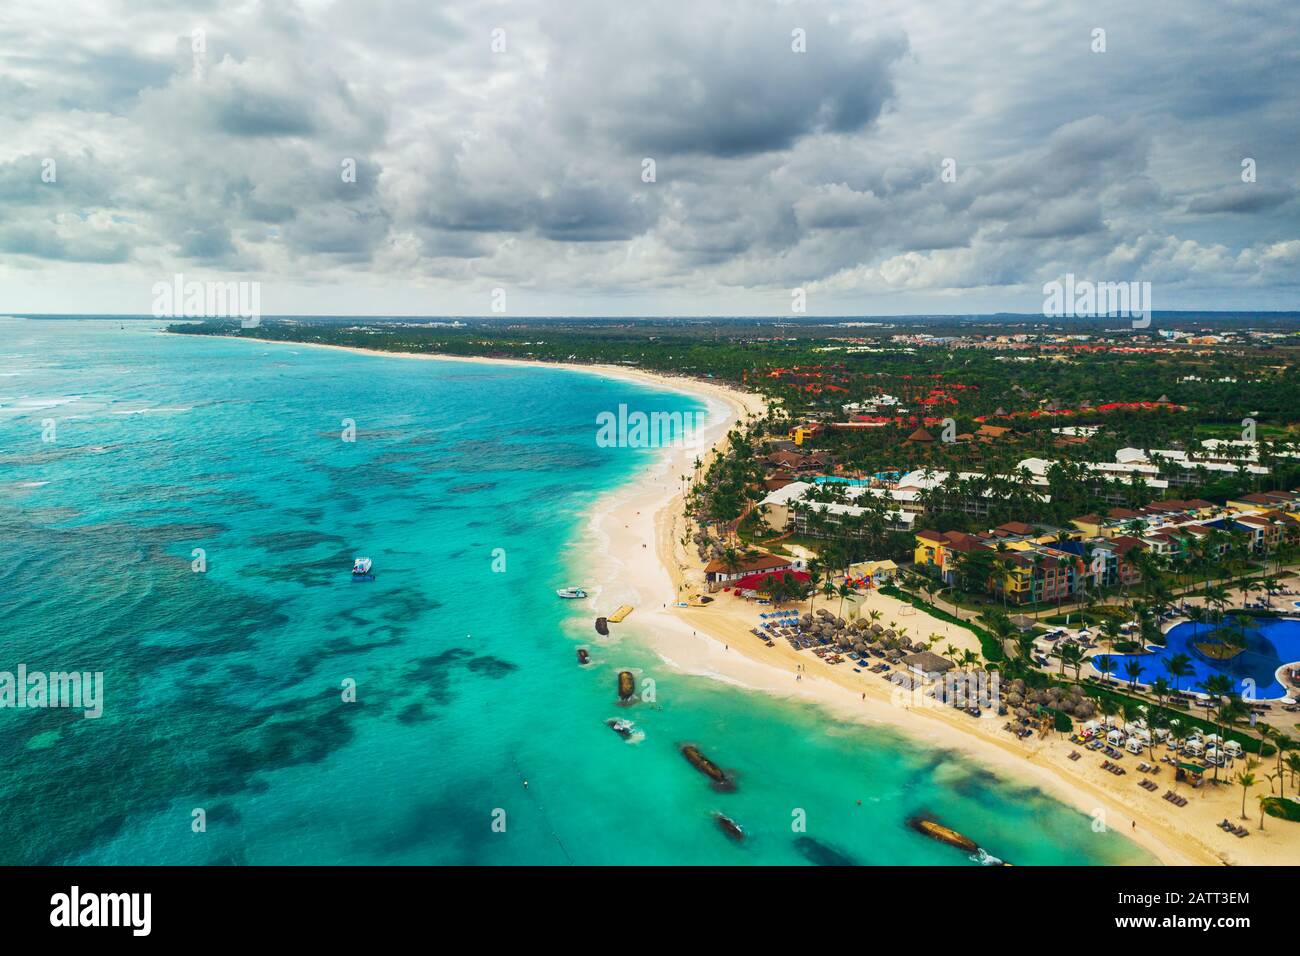 Aerial view of Punta Cana beach resort, Dominican Republic. Summer holiday with parasailing, diving, swimming, sunbathing. Stock Photo